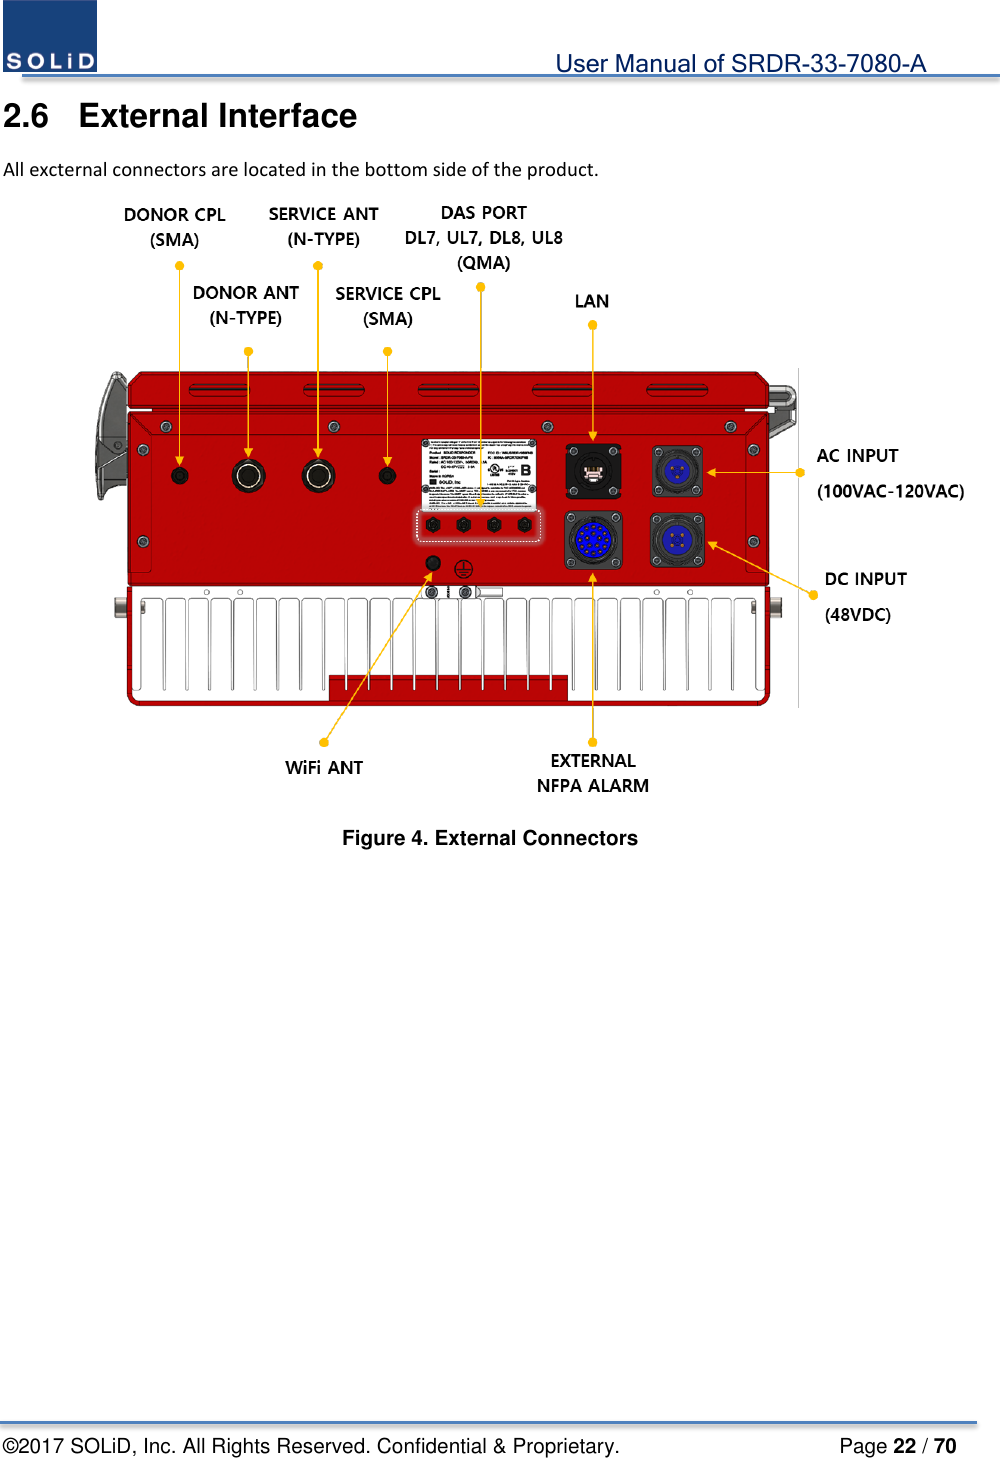                                             User Manual of SRDR-33-7080-A ©2017 SOLiD, Inc. All Rights Reserved. Confidential &amp; Proprietary.                     Page 22 / 70 2.6  External Interface All excternal connectors are located in the bottom side of the product.  Figure 4. External Connectors    